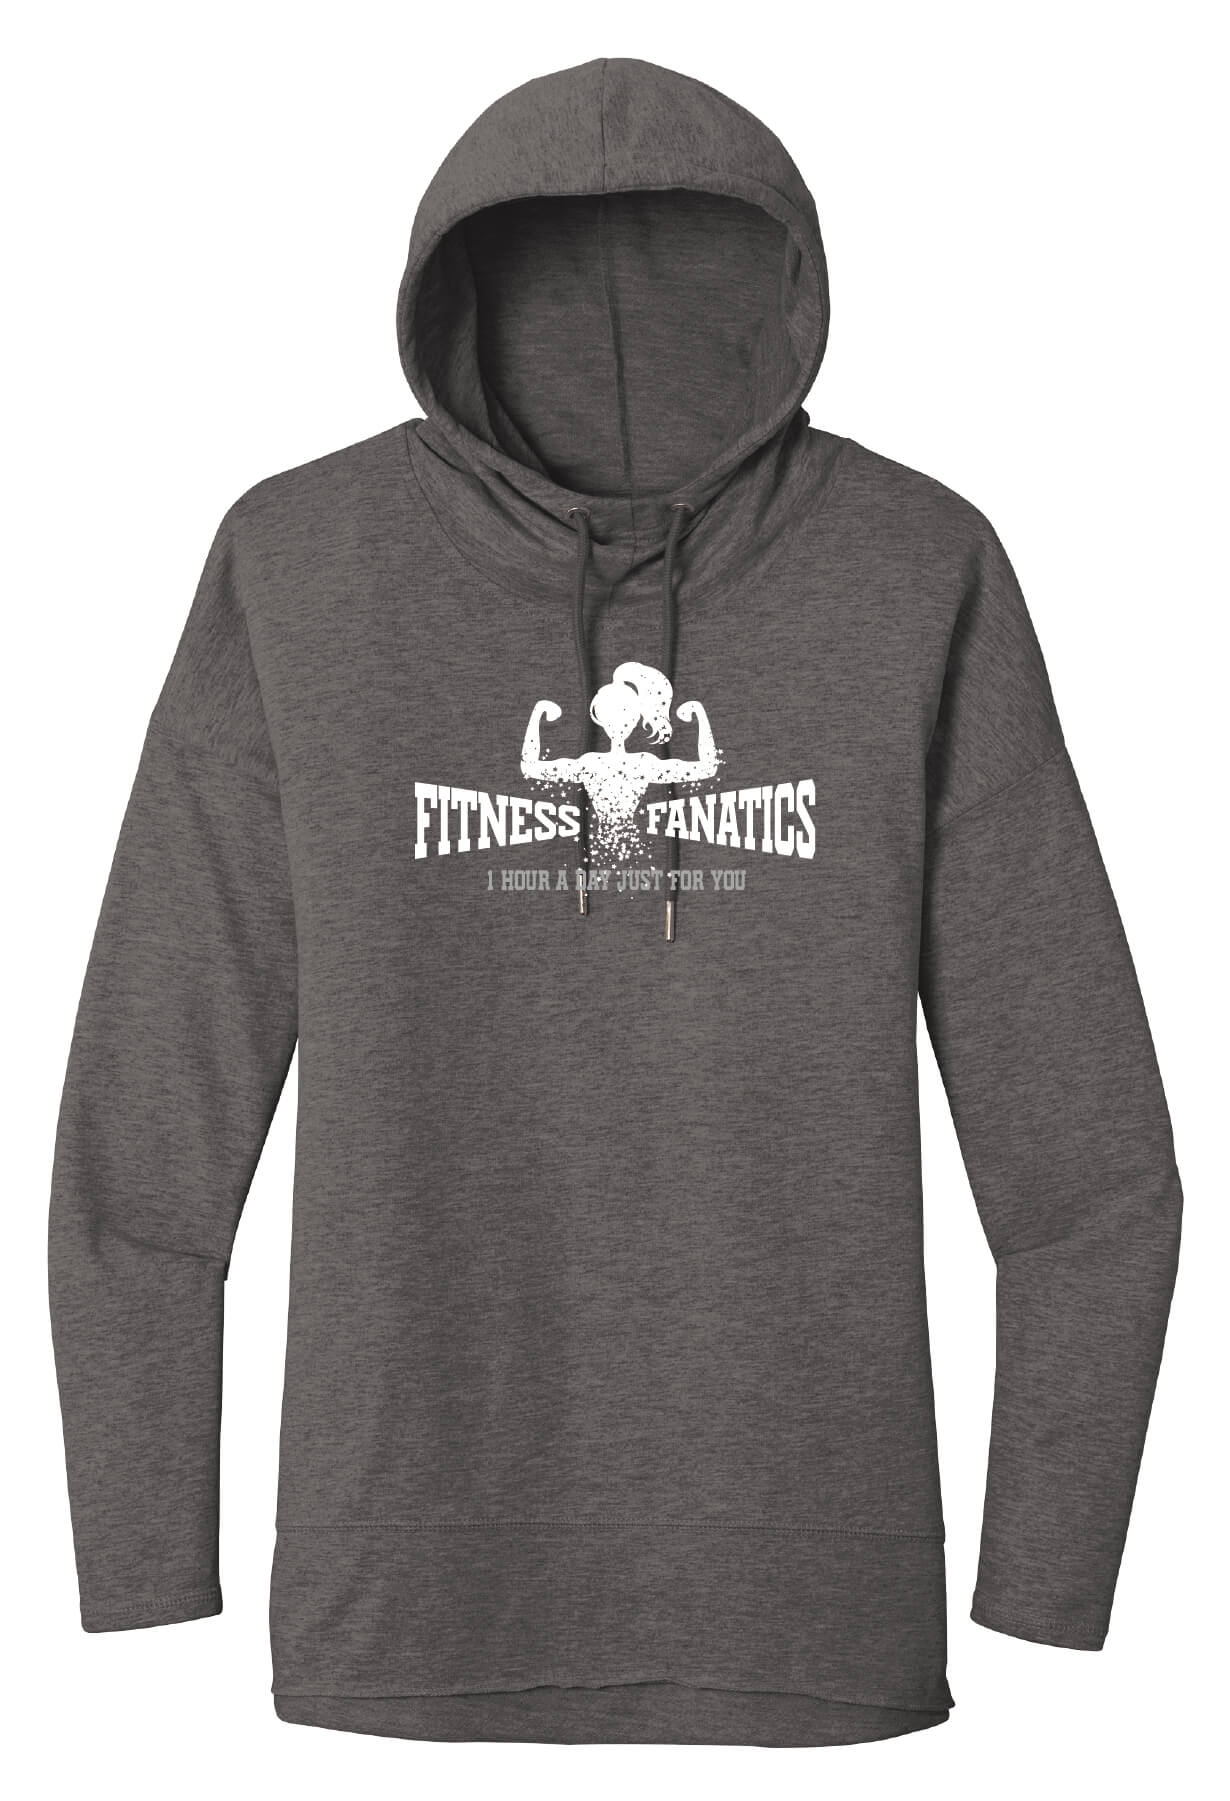 French Terry Hoodie (Womens) gray with white